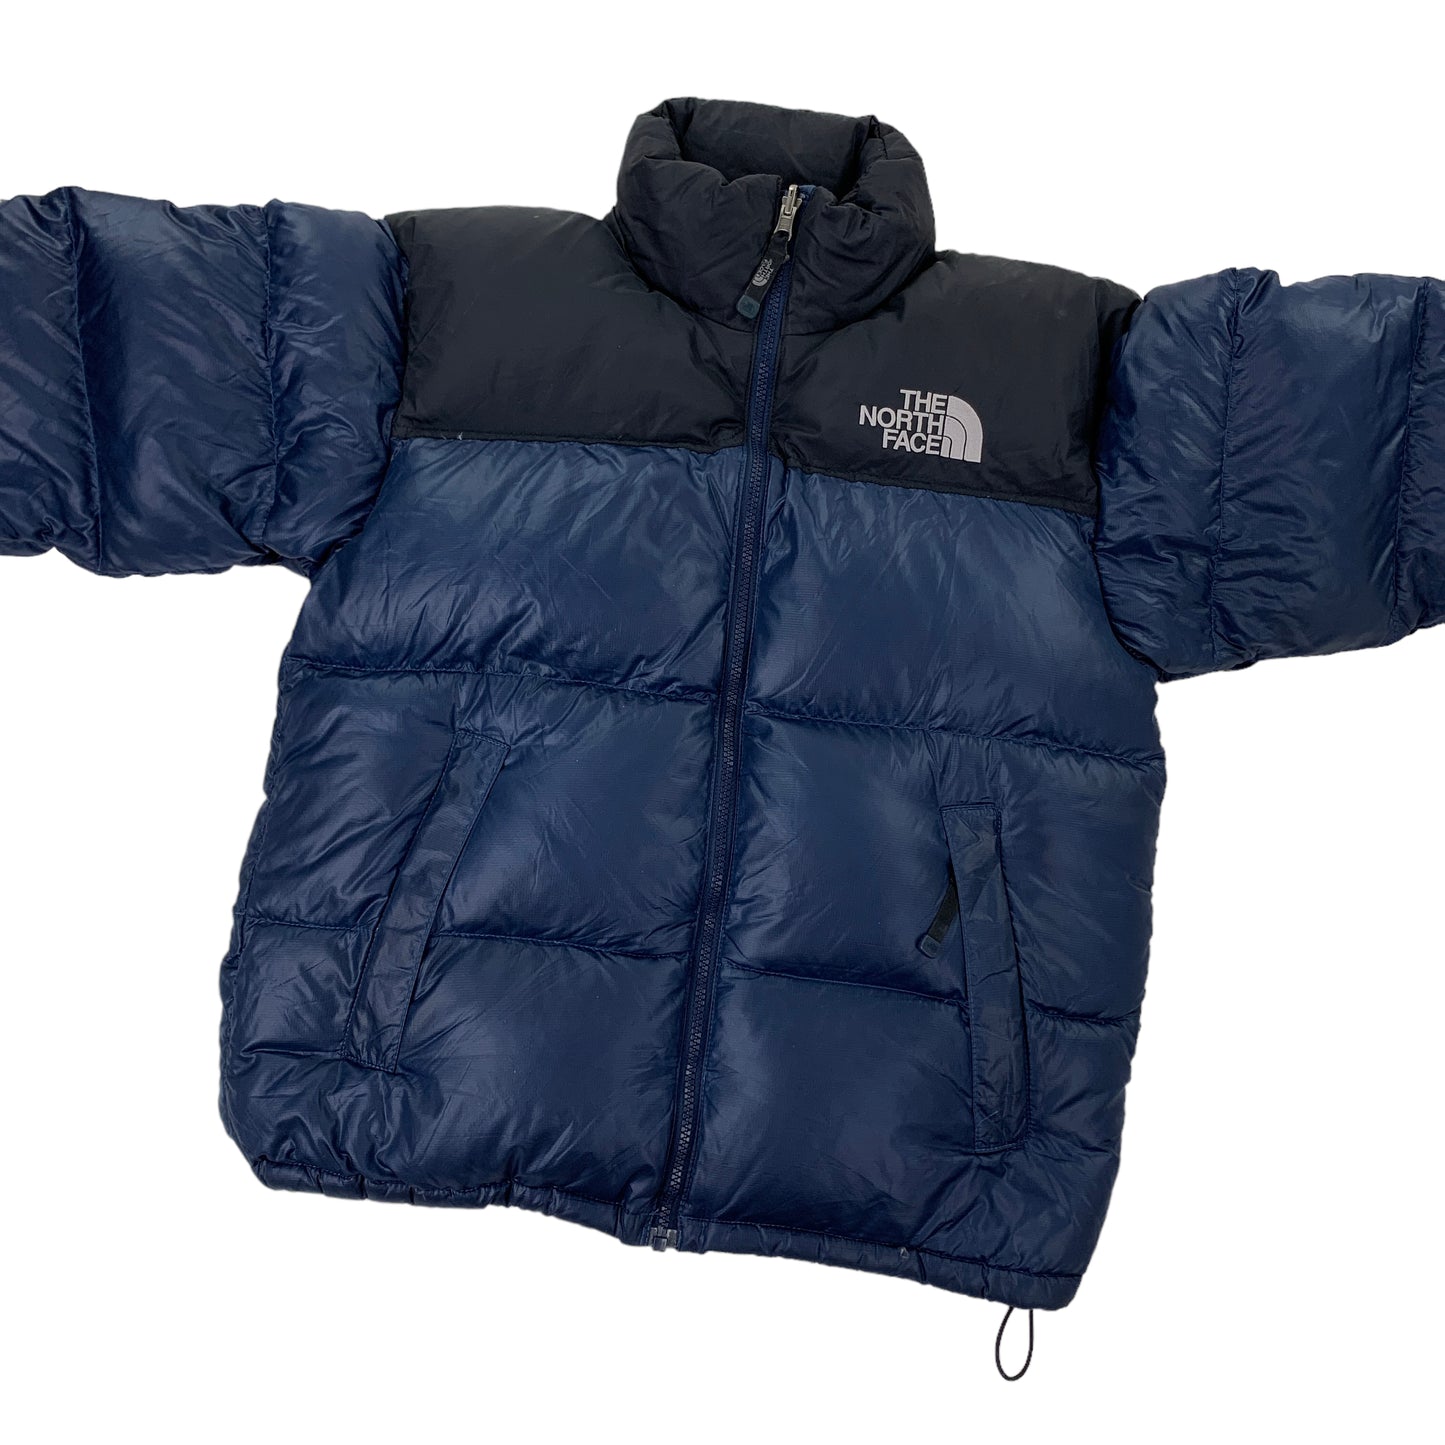 The North Face 700 Nuptse Puffer 1996 - S